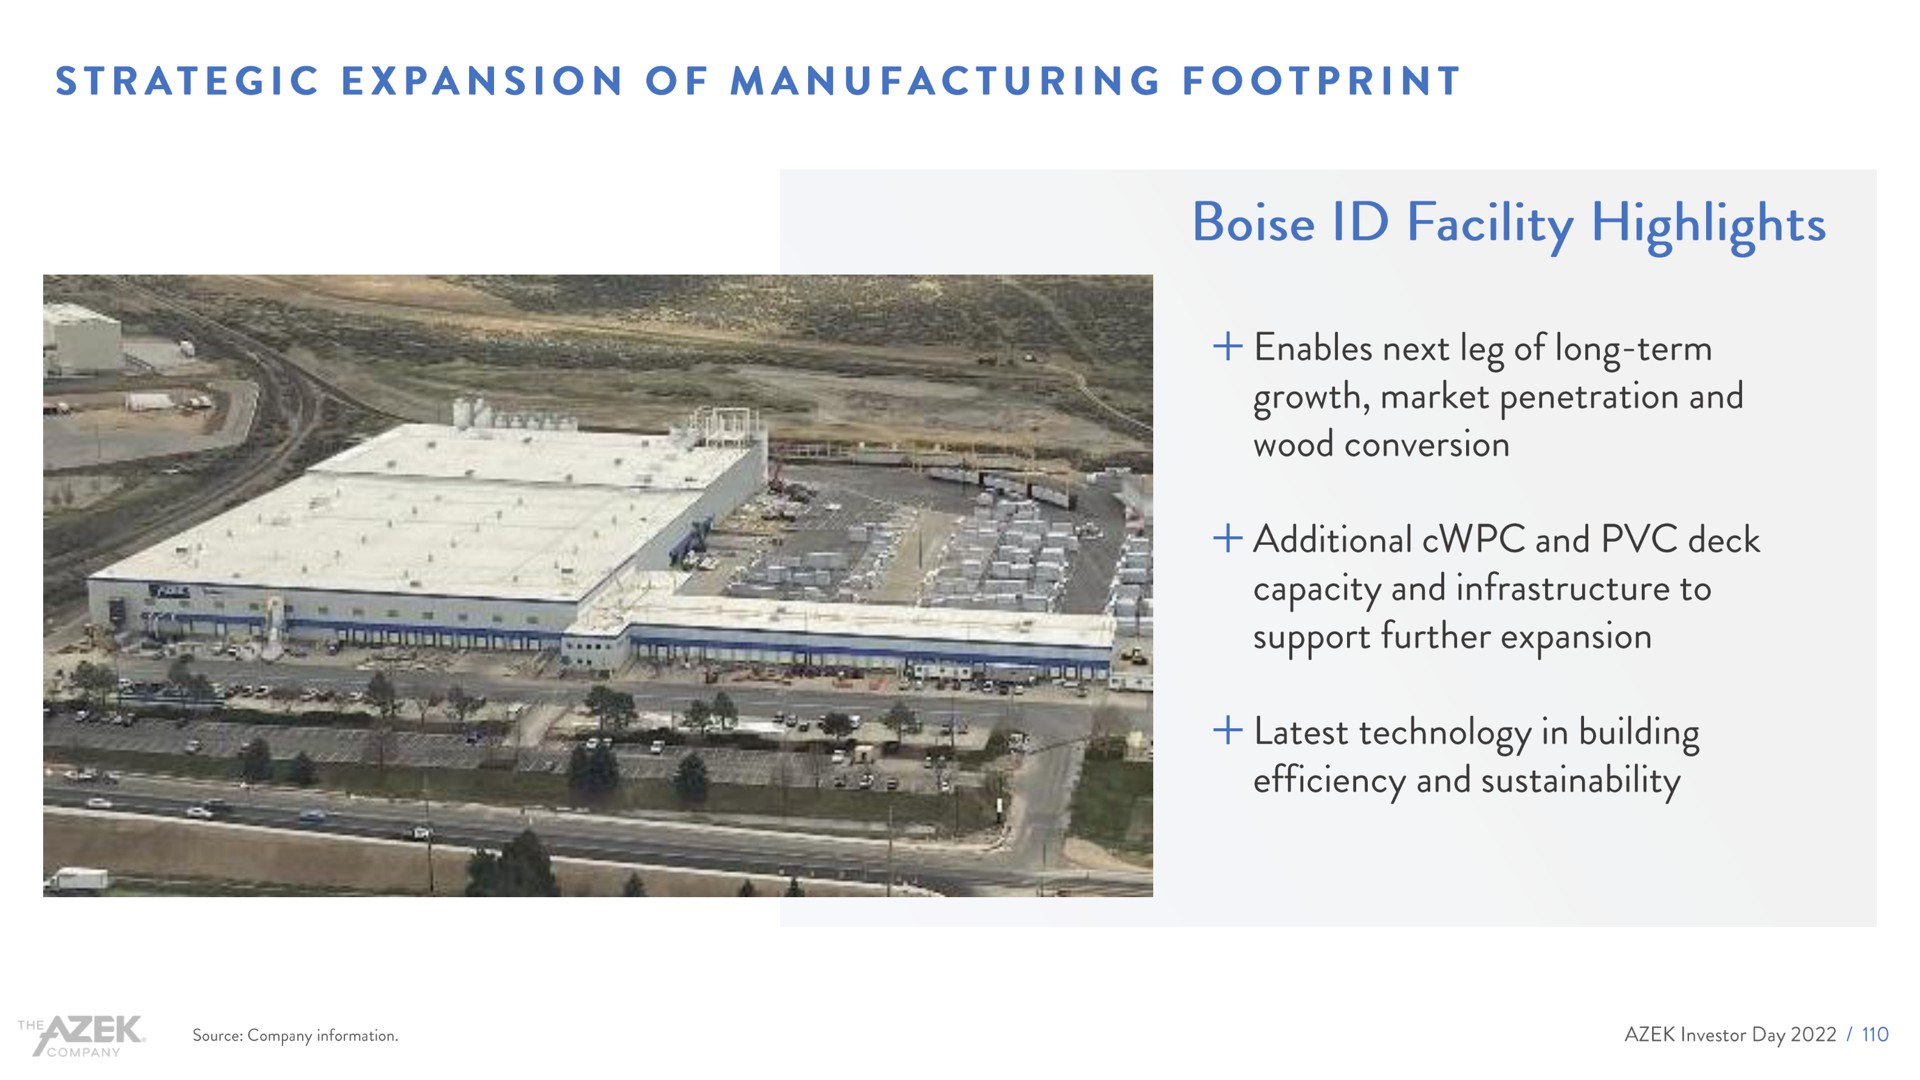 strategic expansion of manufacturing footprint facility highlights | Azek